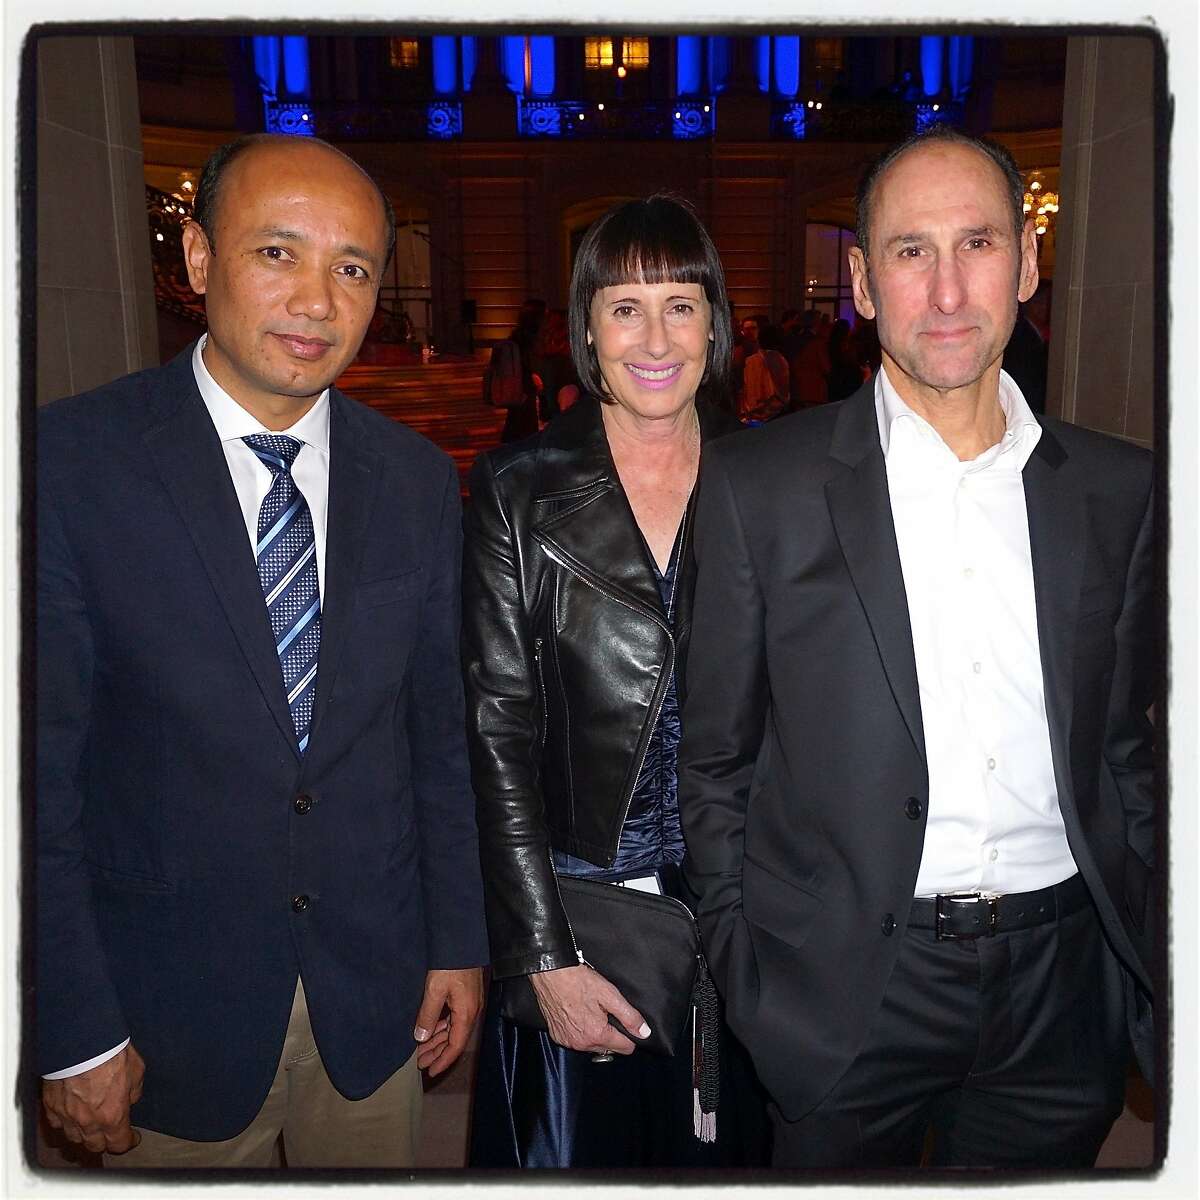 Human Rights Watch honoree Yonous Muhammadi (at left) with Carla Emil and Rich Silverstein at City Hall. Nov 2016.